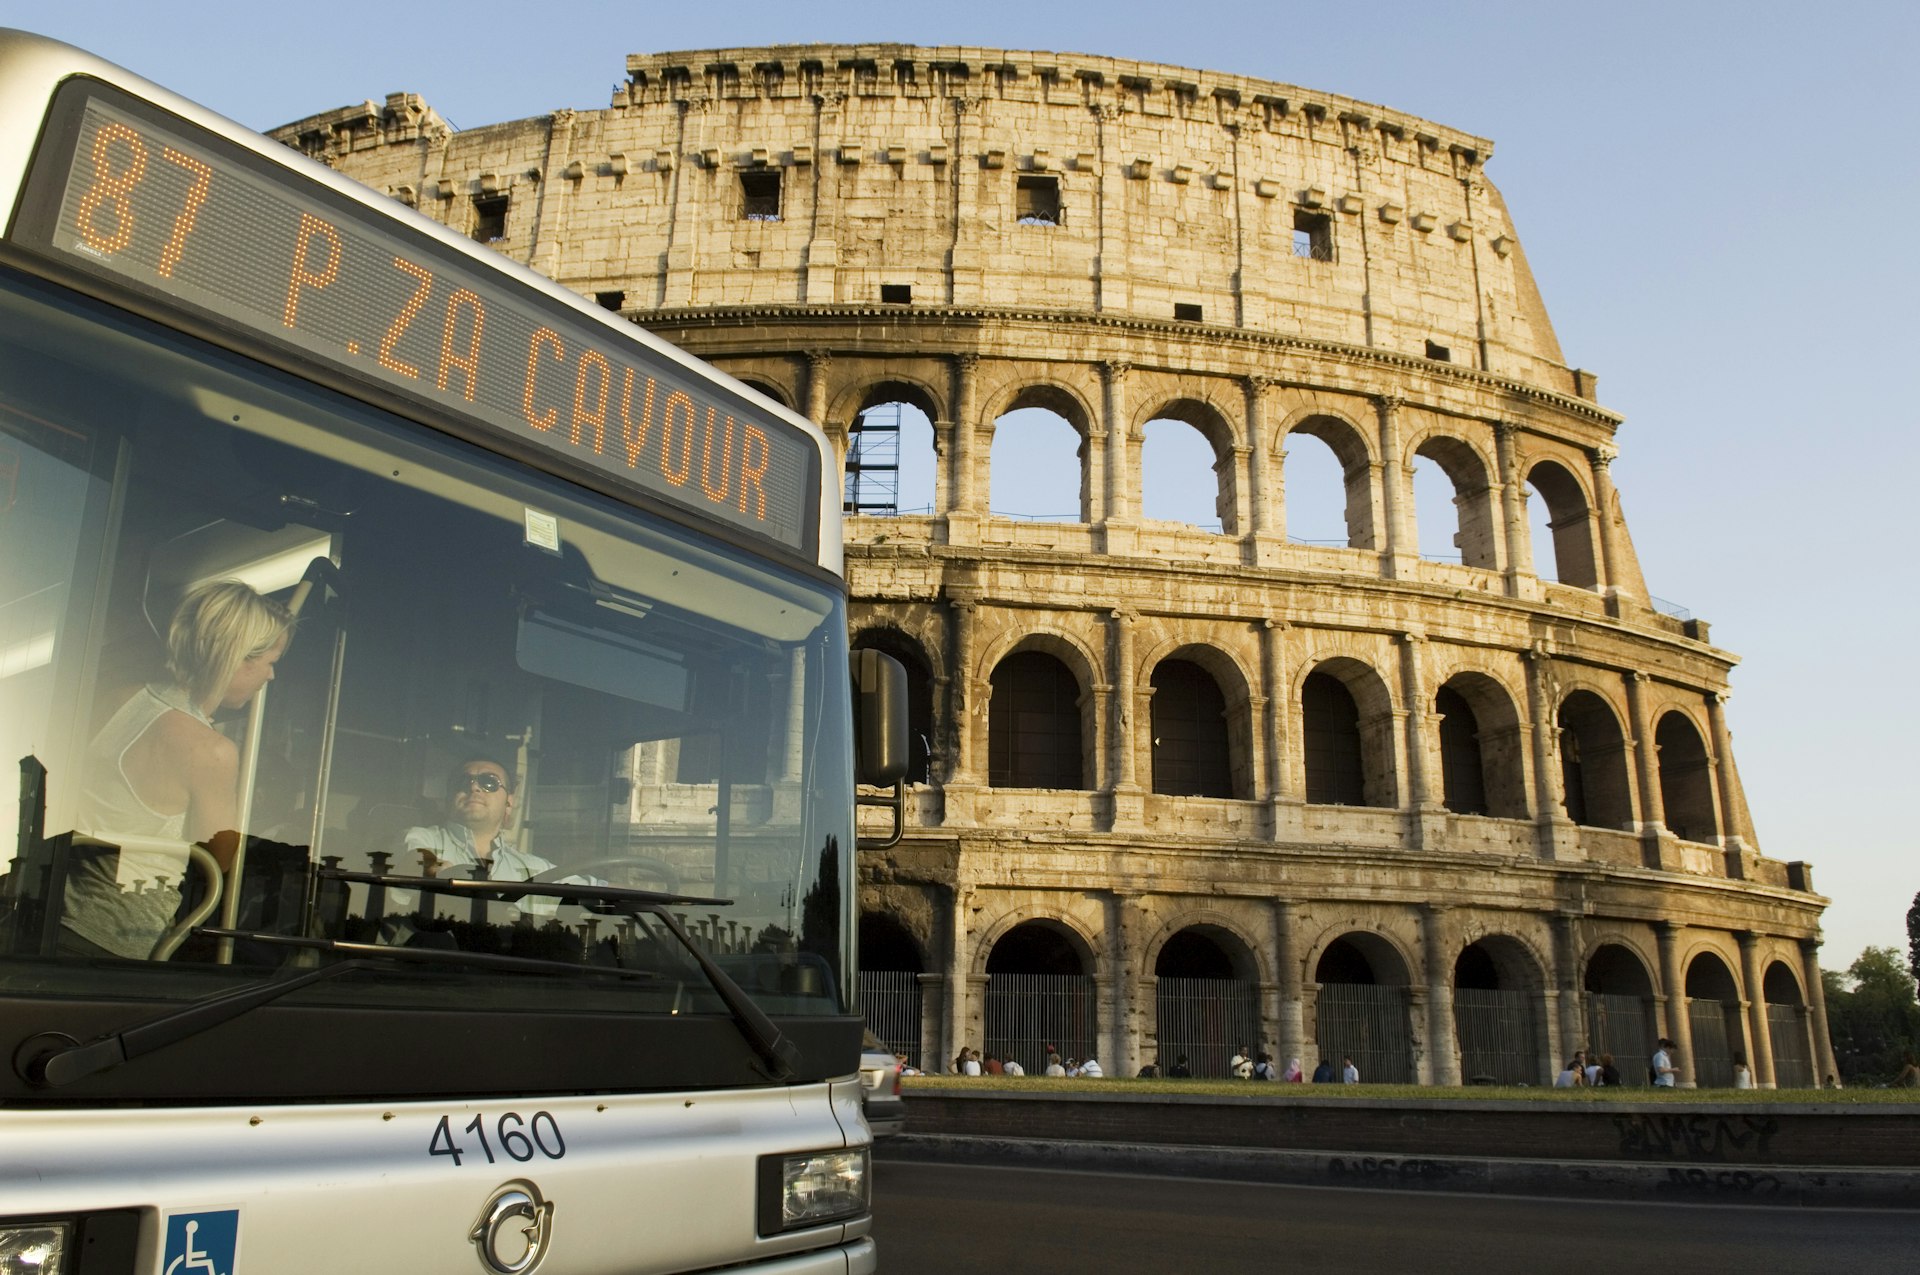 A bus outside the Colosseum in Rome